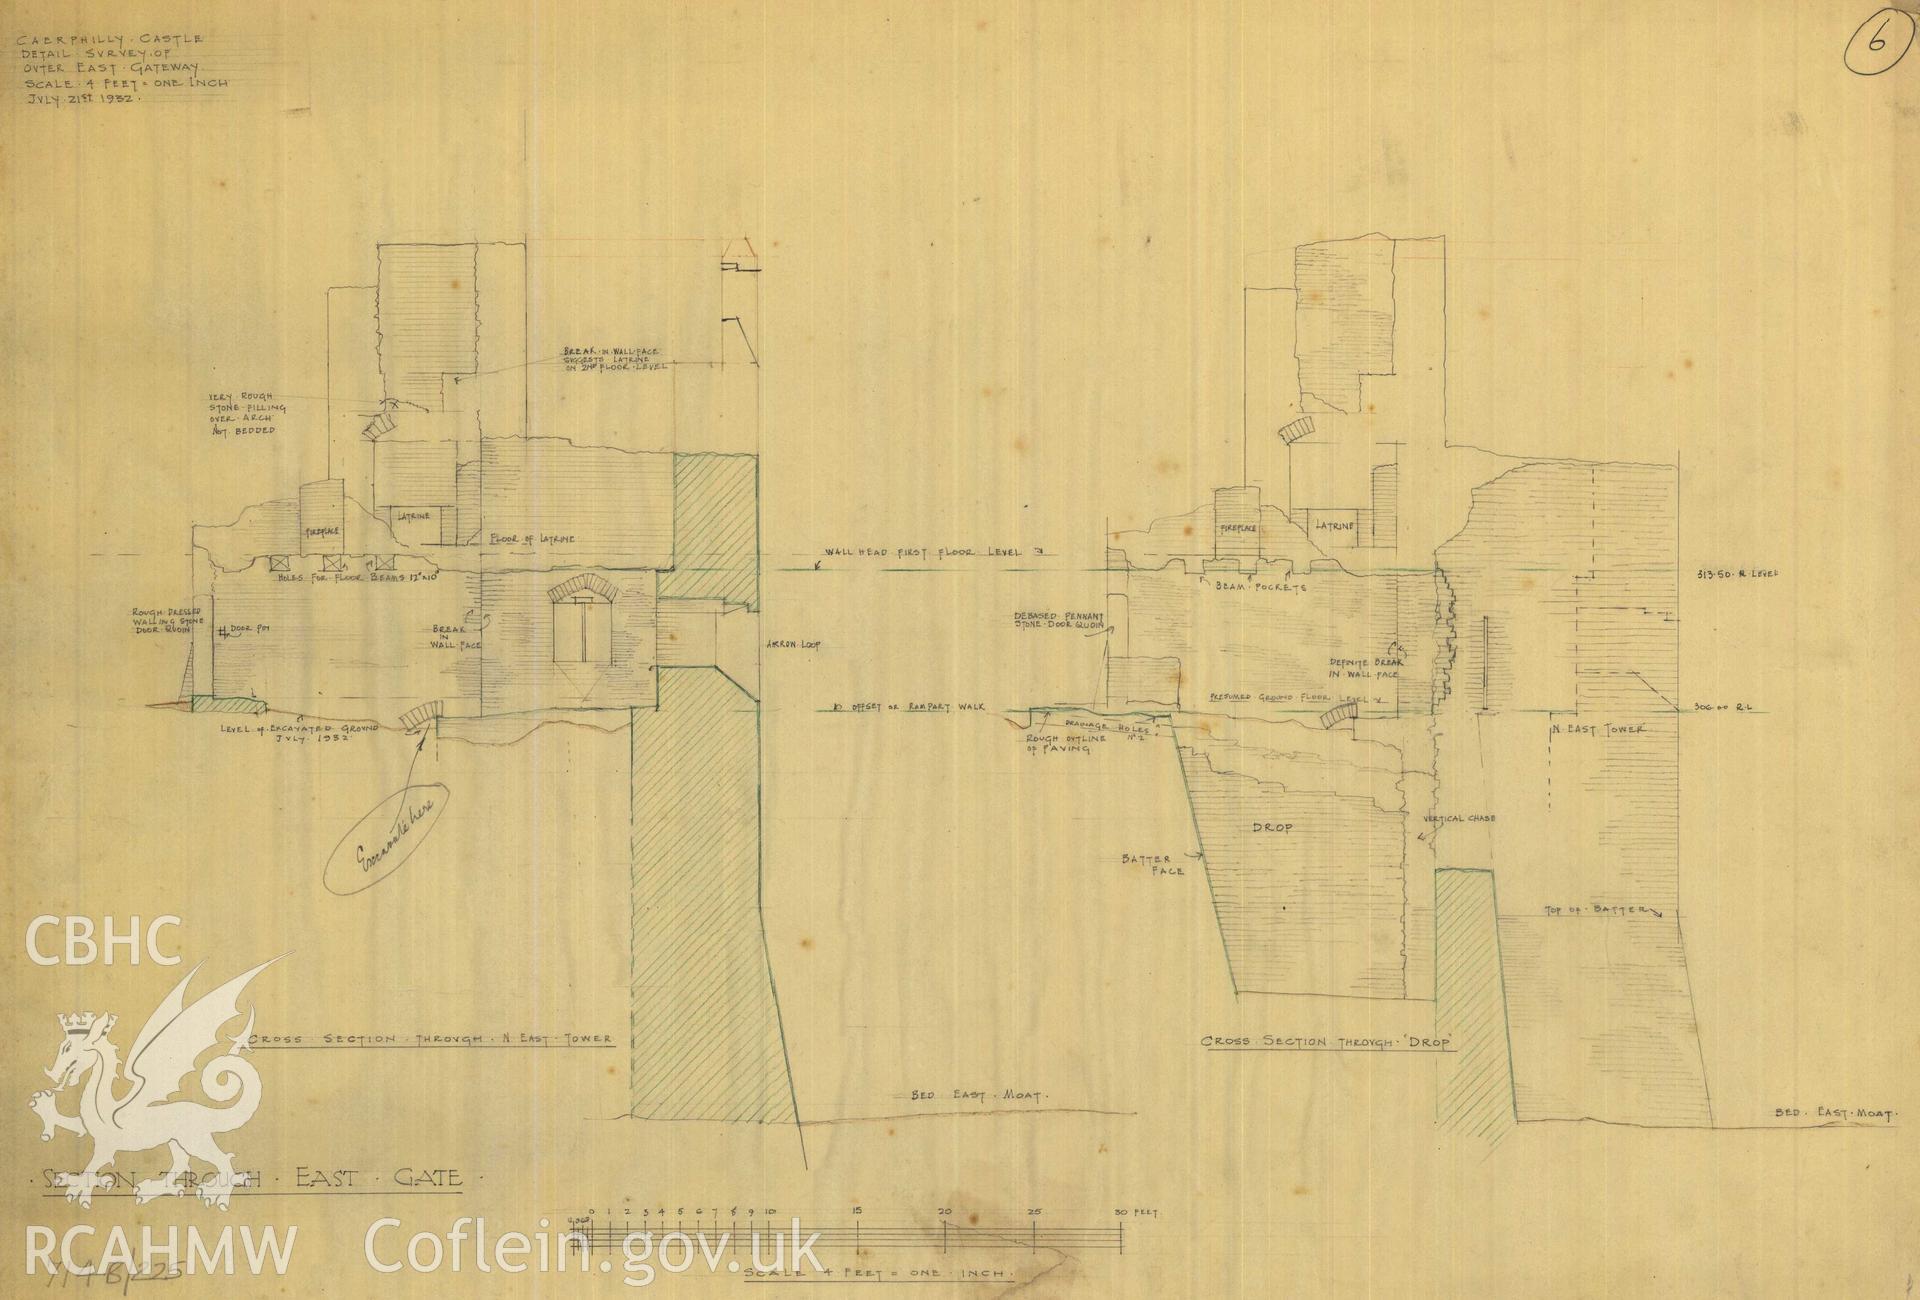 Cadw guardianship monument drawing of Caerphilly Castle. Mid W gate, sections. Cadw Ref. No:714B/225. Scale 1:48.